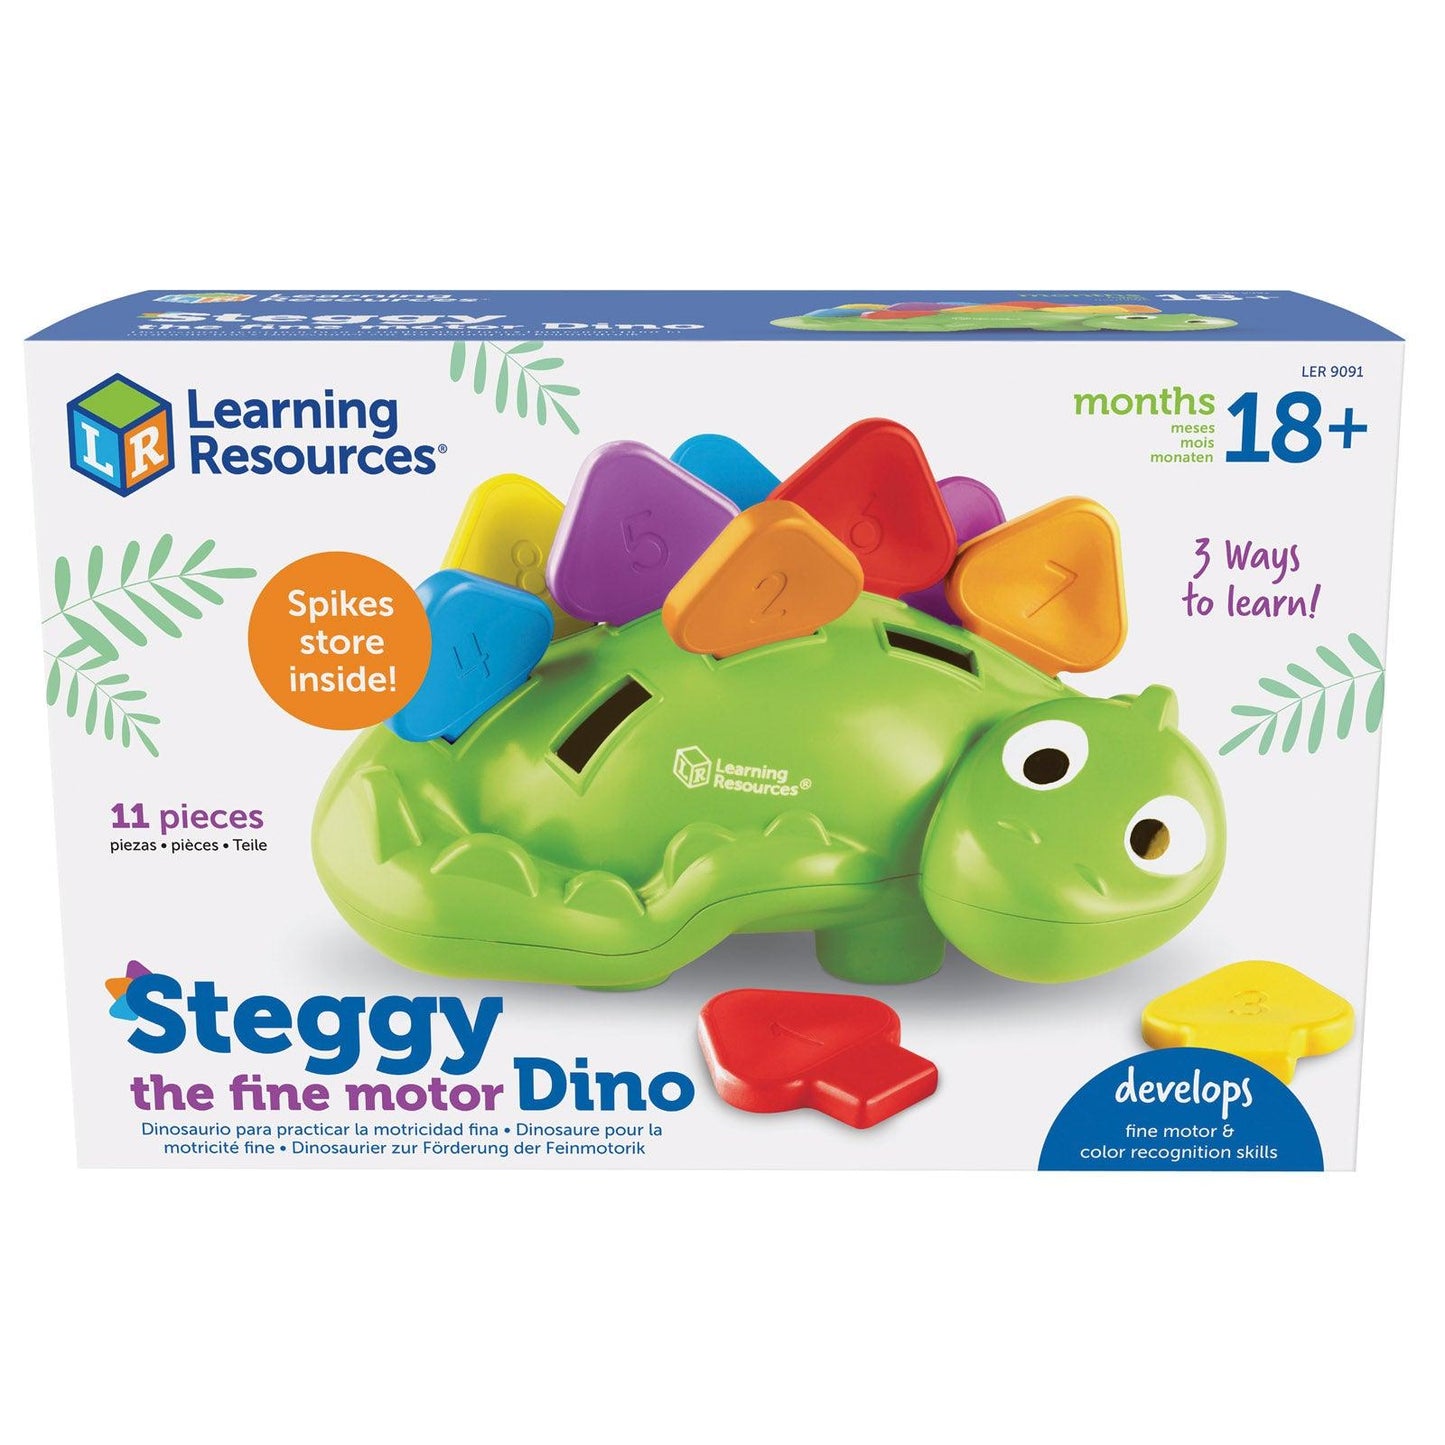 Steggy's Fine Motor Dino: Color Matching & Number Recognition | For Toddlers Ages 2 to 5 - Loomini